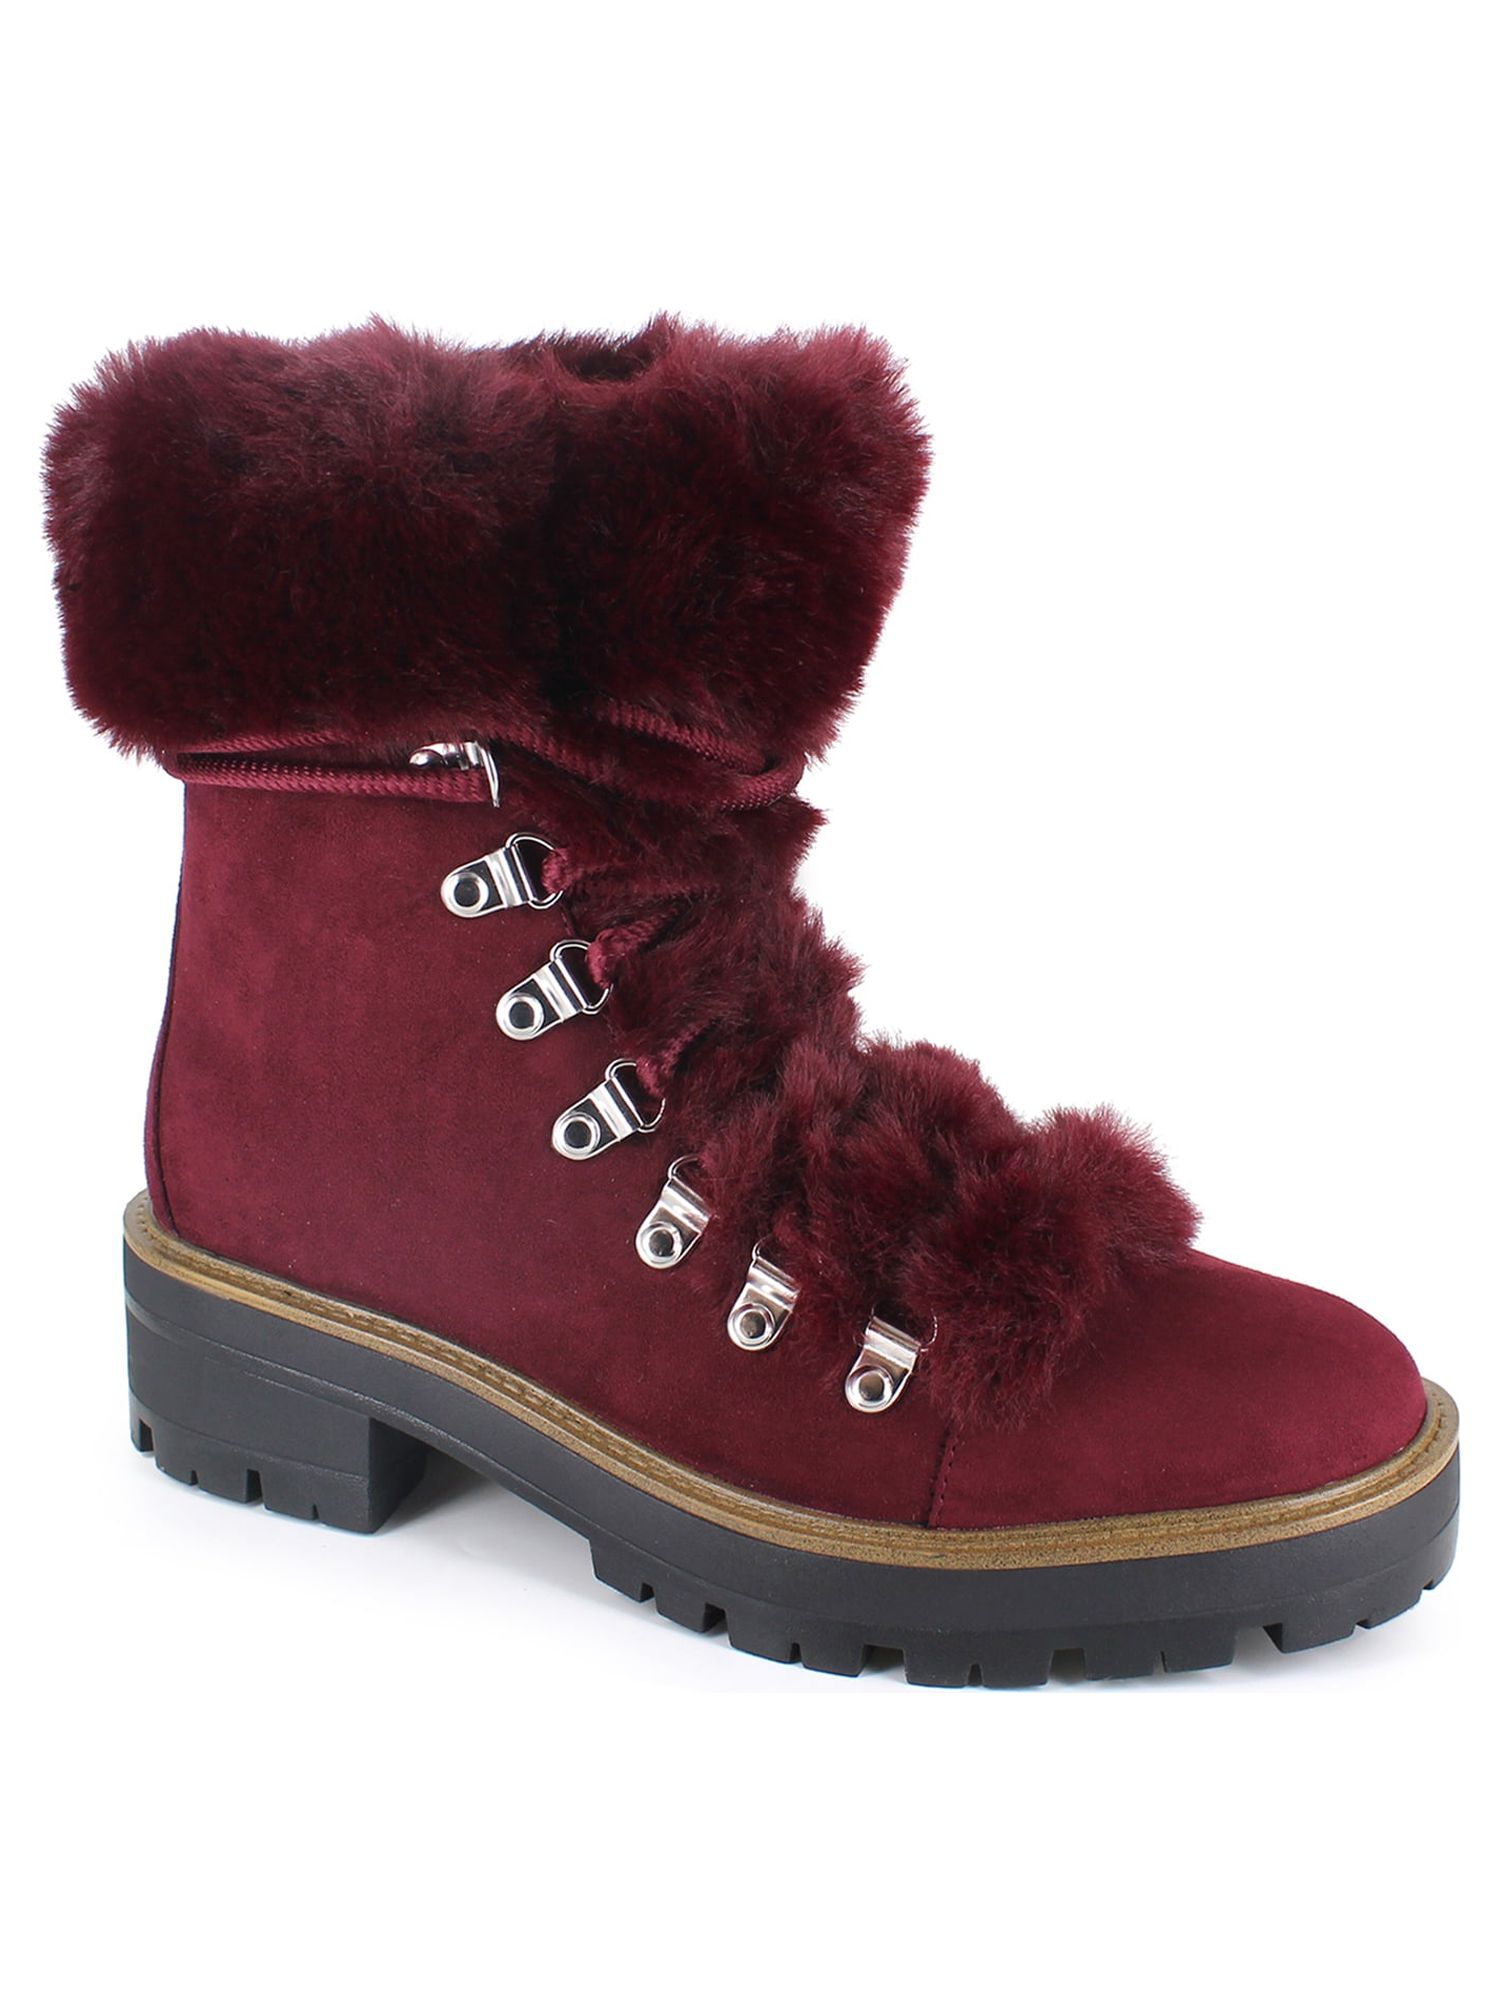 PORTLAND by Portland Boot Company Faux Fur Hiker Boot - image 1 of 5